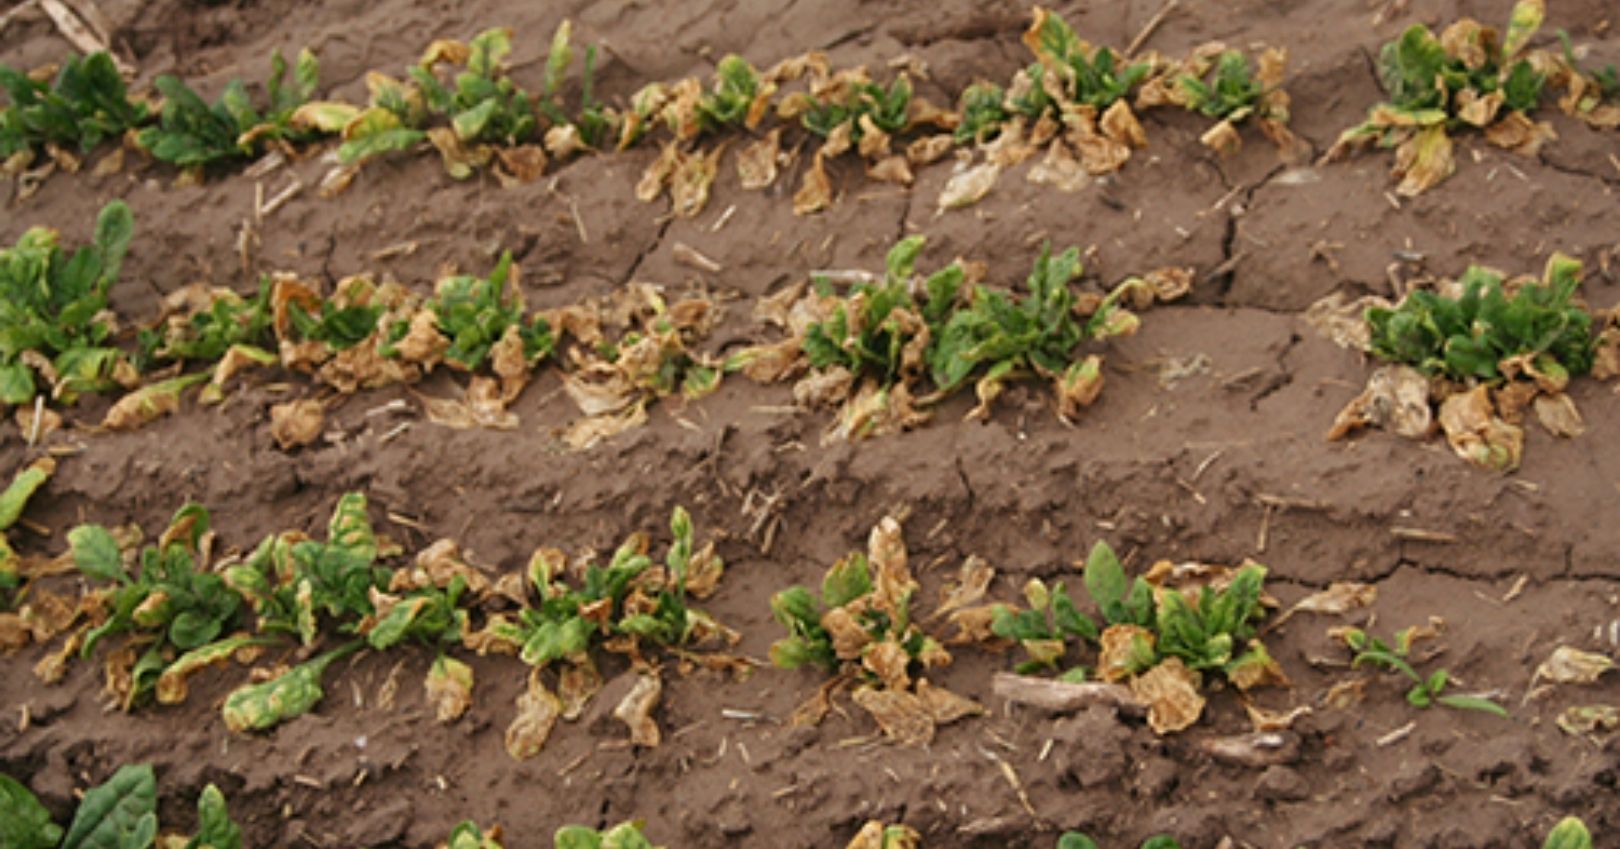 Beet Curly Top Virus in Spinach Field